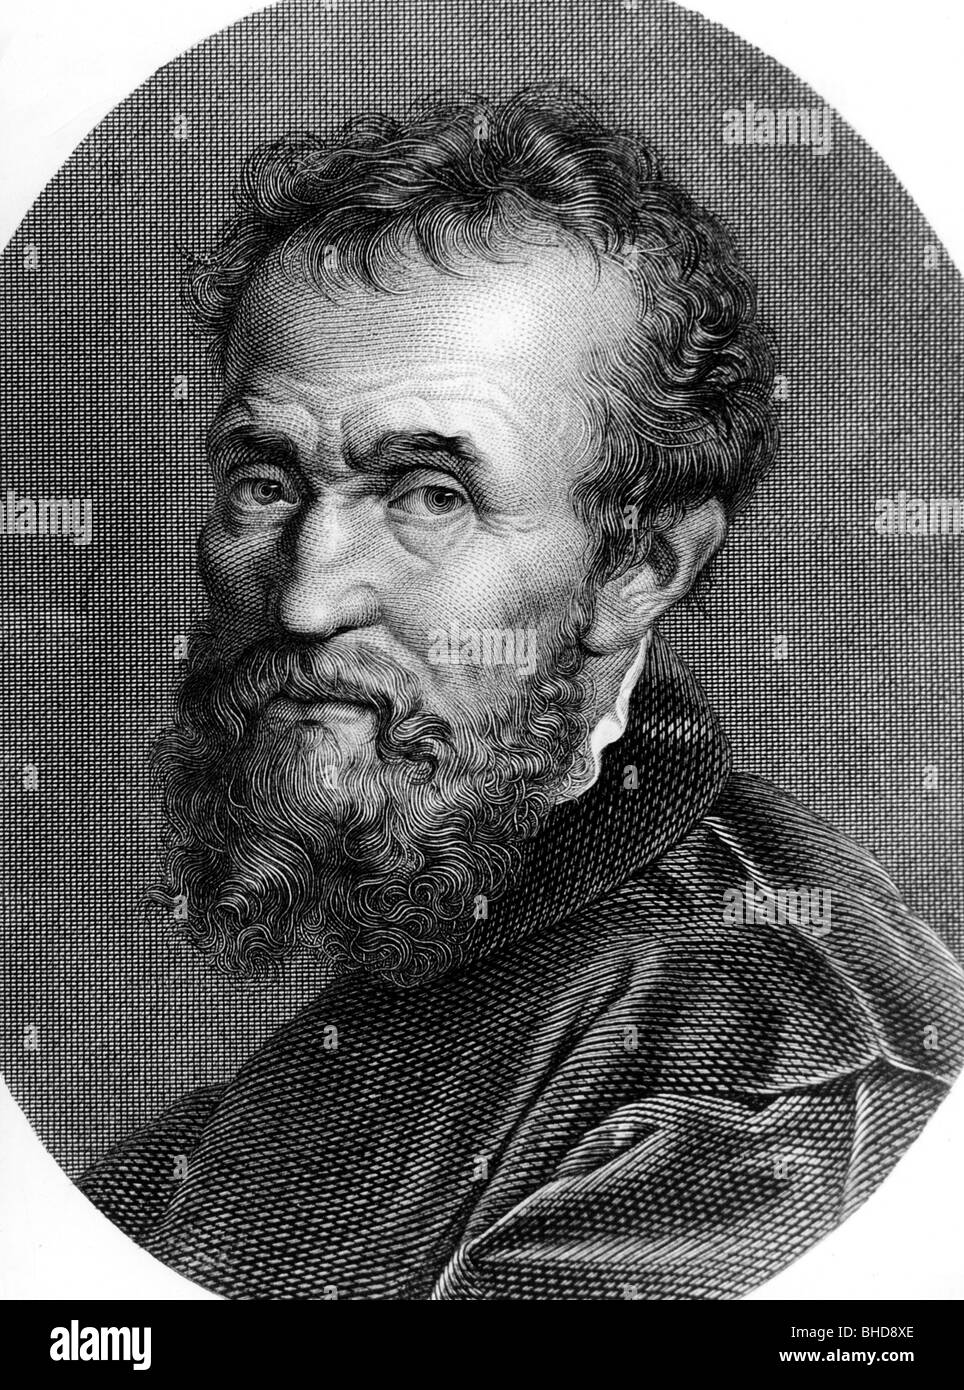 Michelangelo Buonarotti, 6.3.1475 - 18.2.1564, Italian sculptor, painter, architect and author / writer, portrait, steel engraving, by Jacob Fleischmann, Nuremberg, Germany, 19th century, Artist's Copyright has not to be cleared Stock Photo